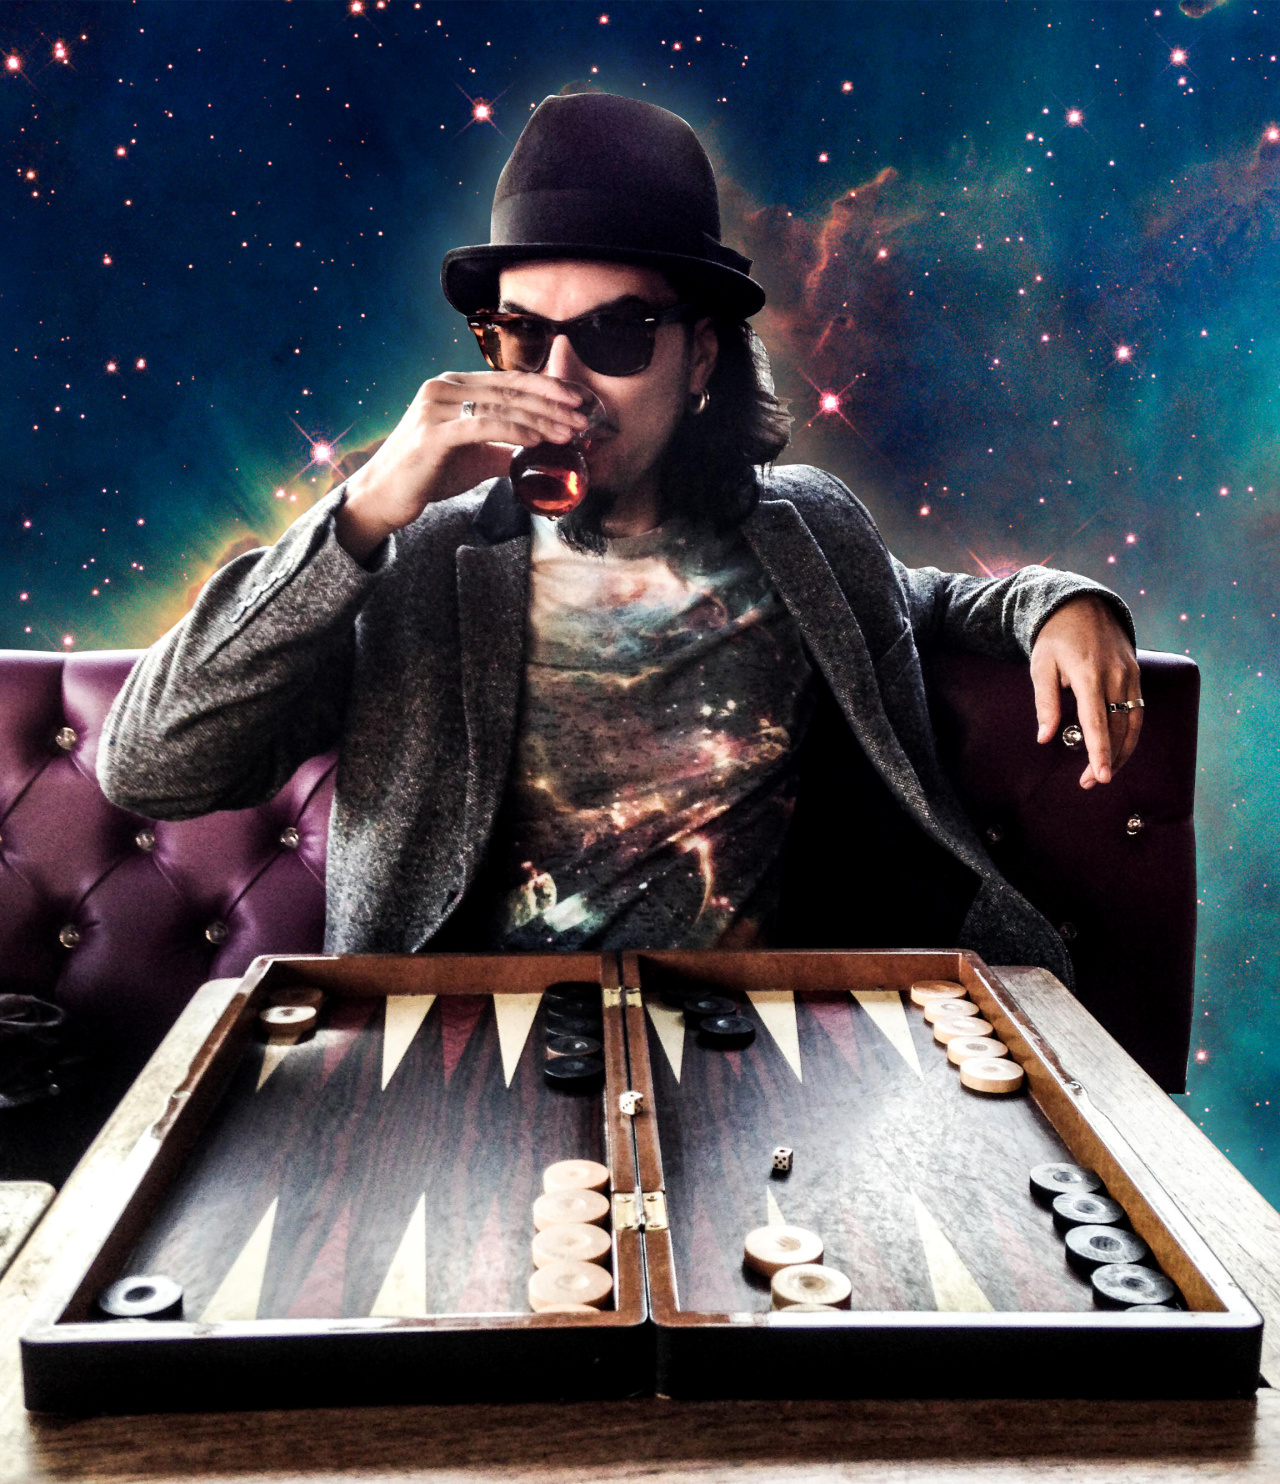 Memo Aktens is sitting on a violet velvet couch and in front of a backgammon game, drinking turkish tea. The background is a colage of the universe. 